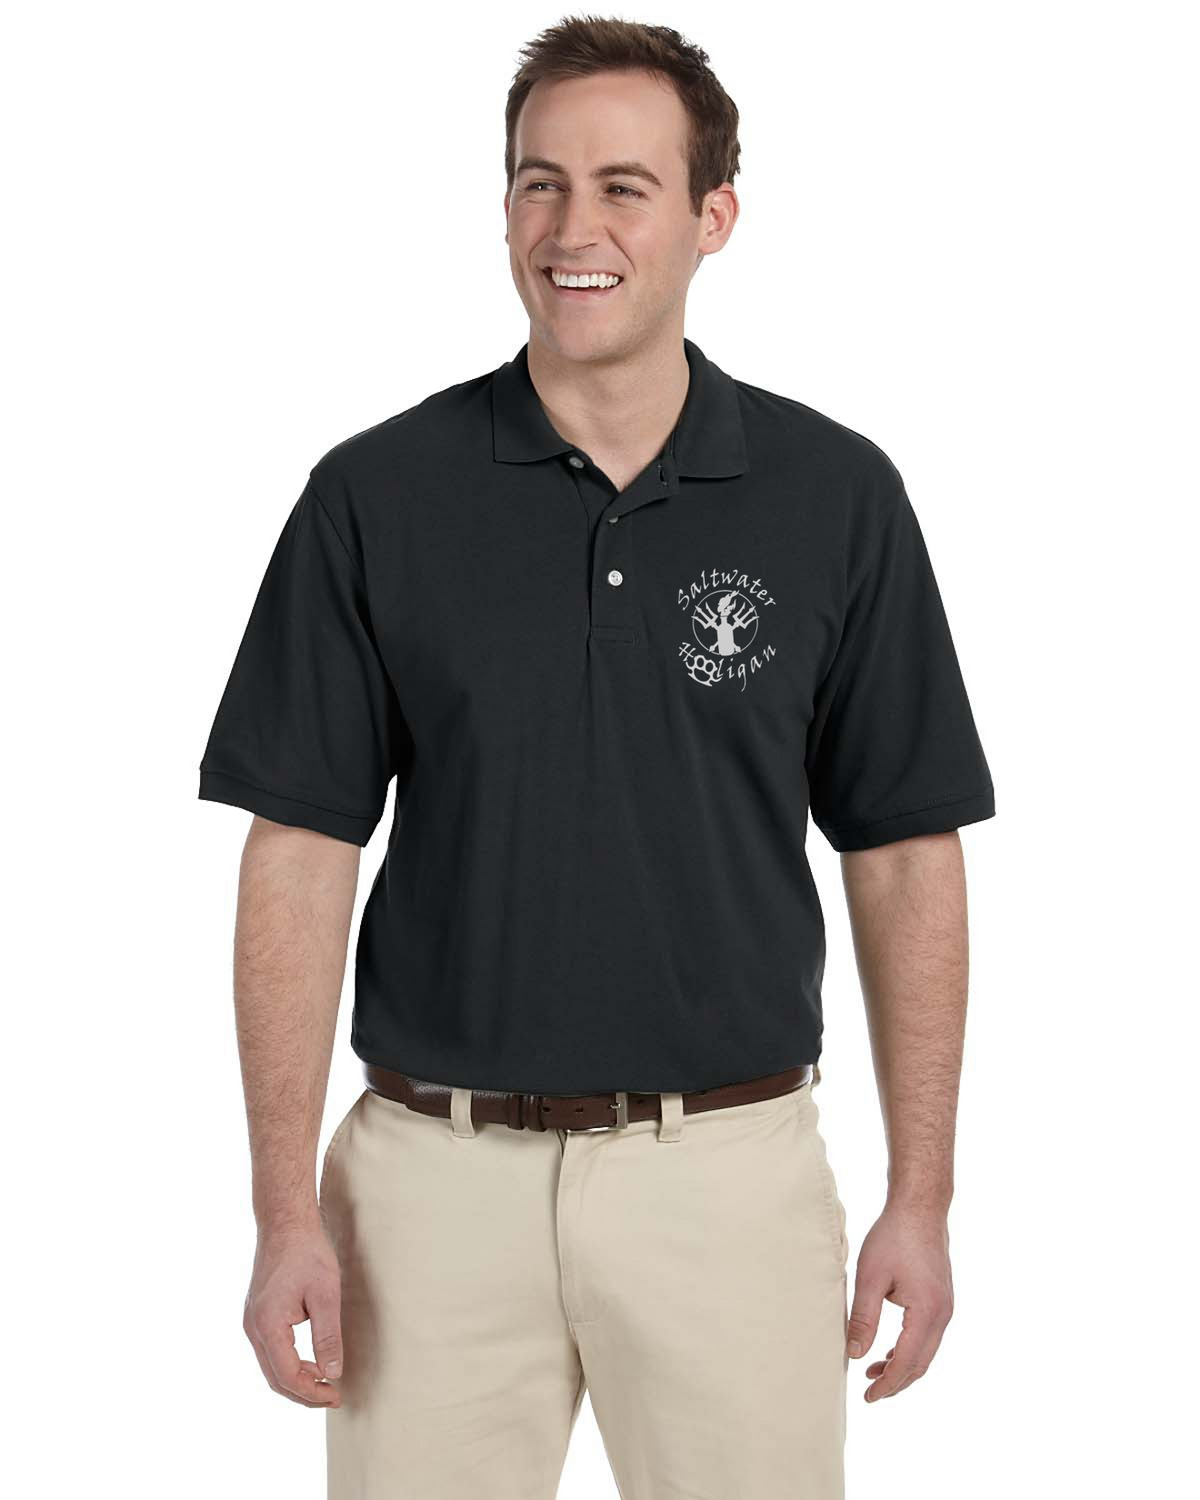 Saltwater Hooligan Cotton/poly blend polo with ROUND design